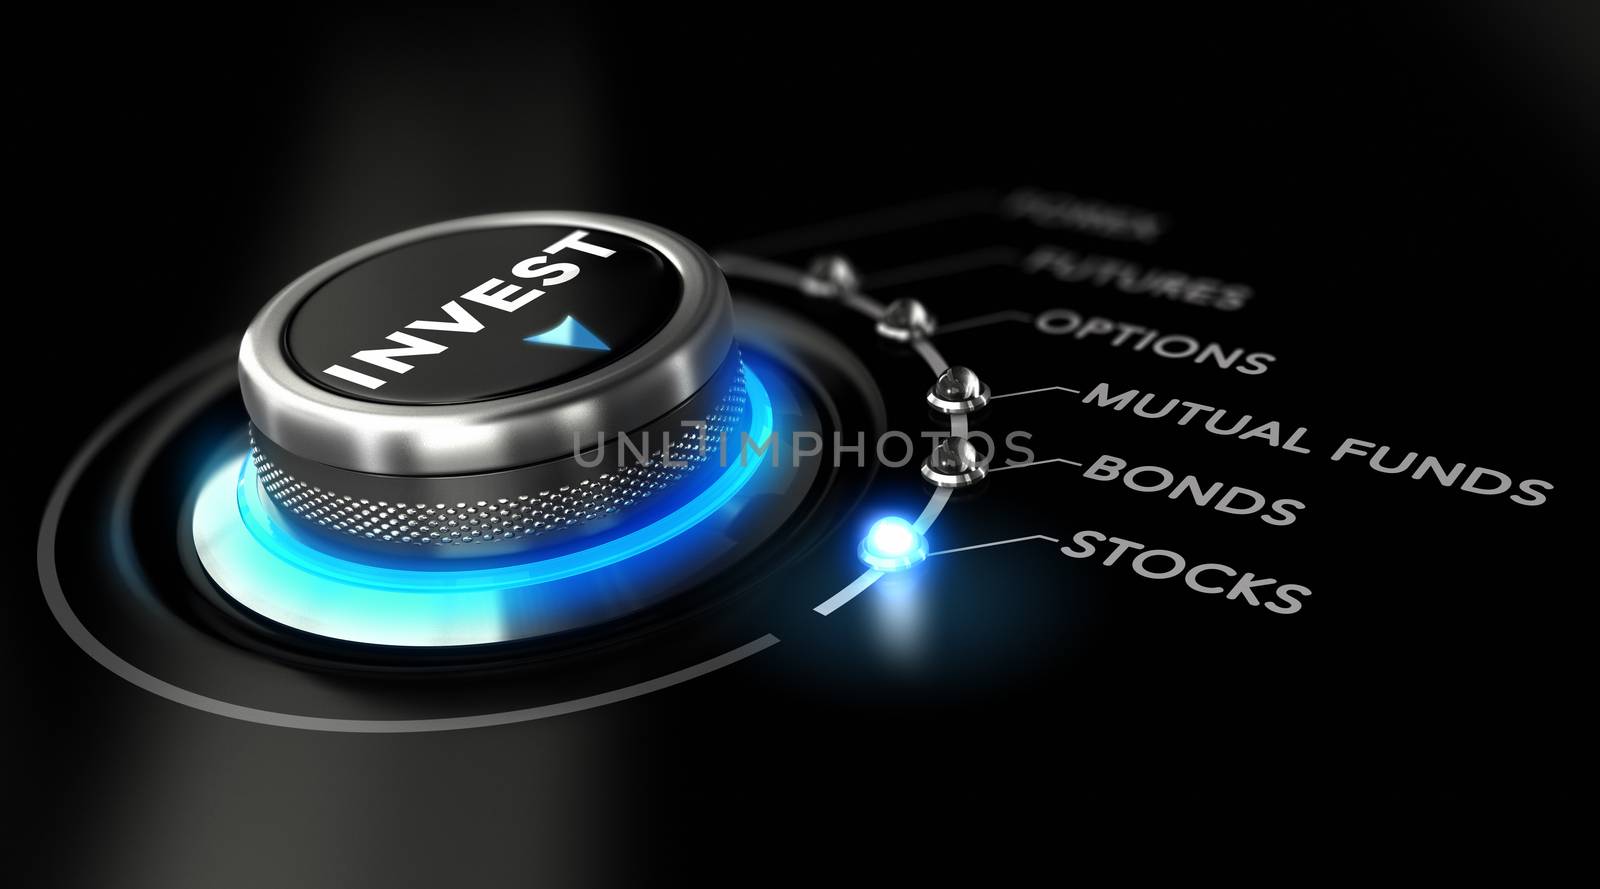 Switch button positioned on the word stock, black background and blue light. Conceptual image for illustration of investment strategy